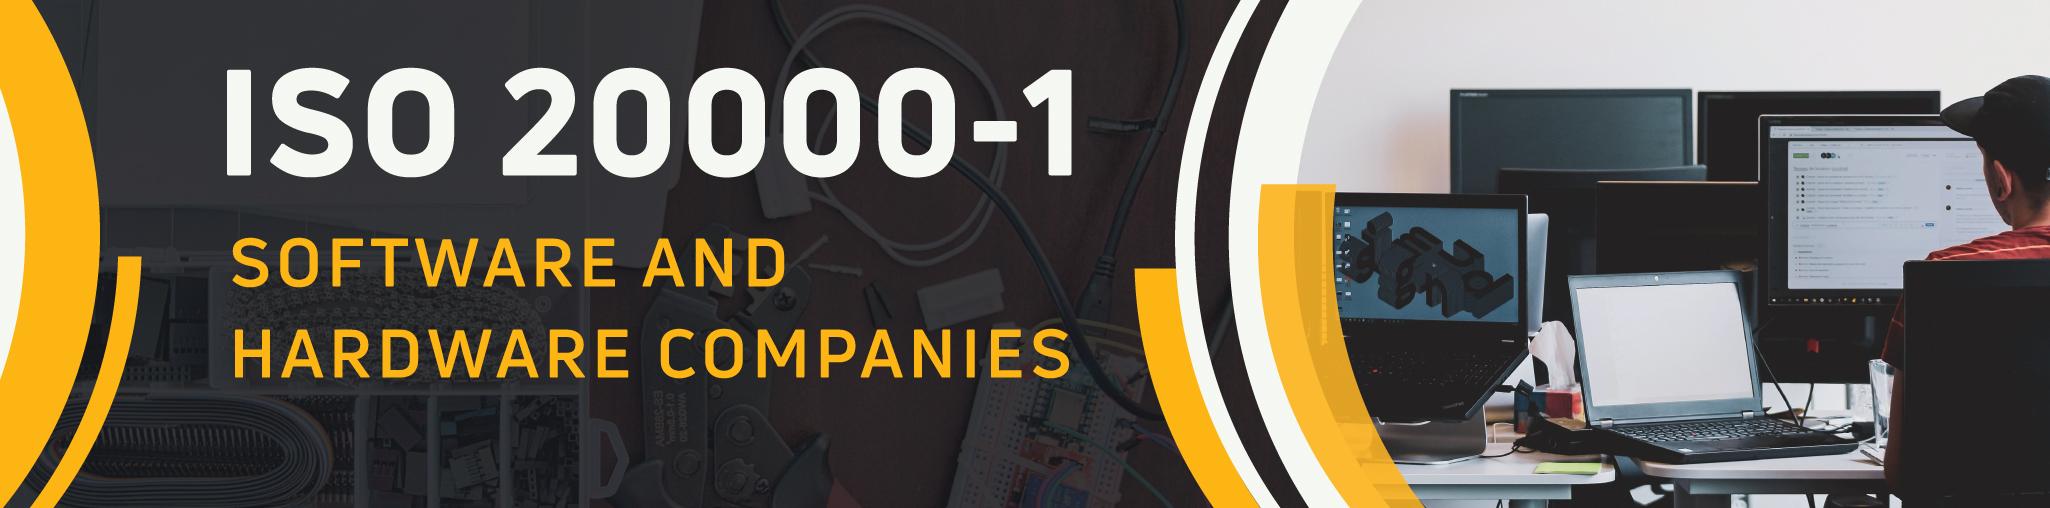 ISO 20000-1 for IT Software and Hardware Companies